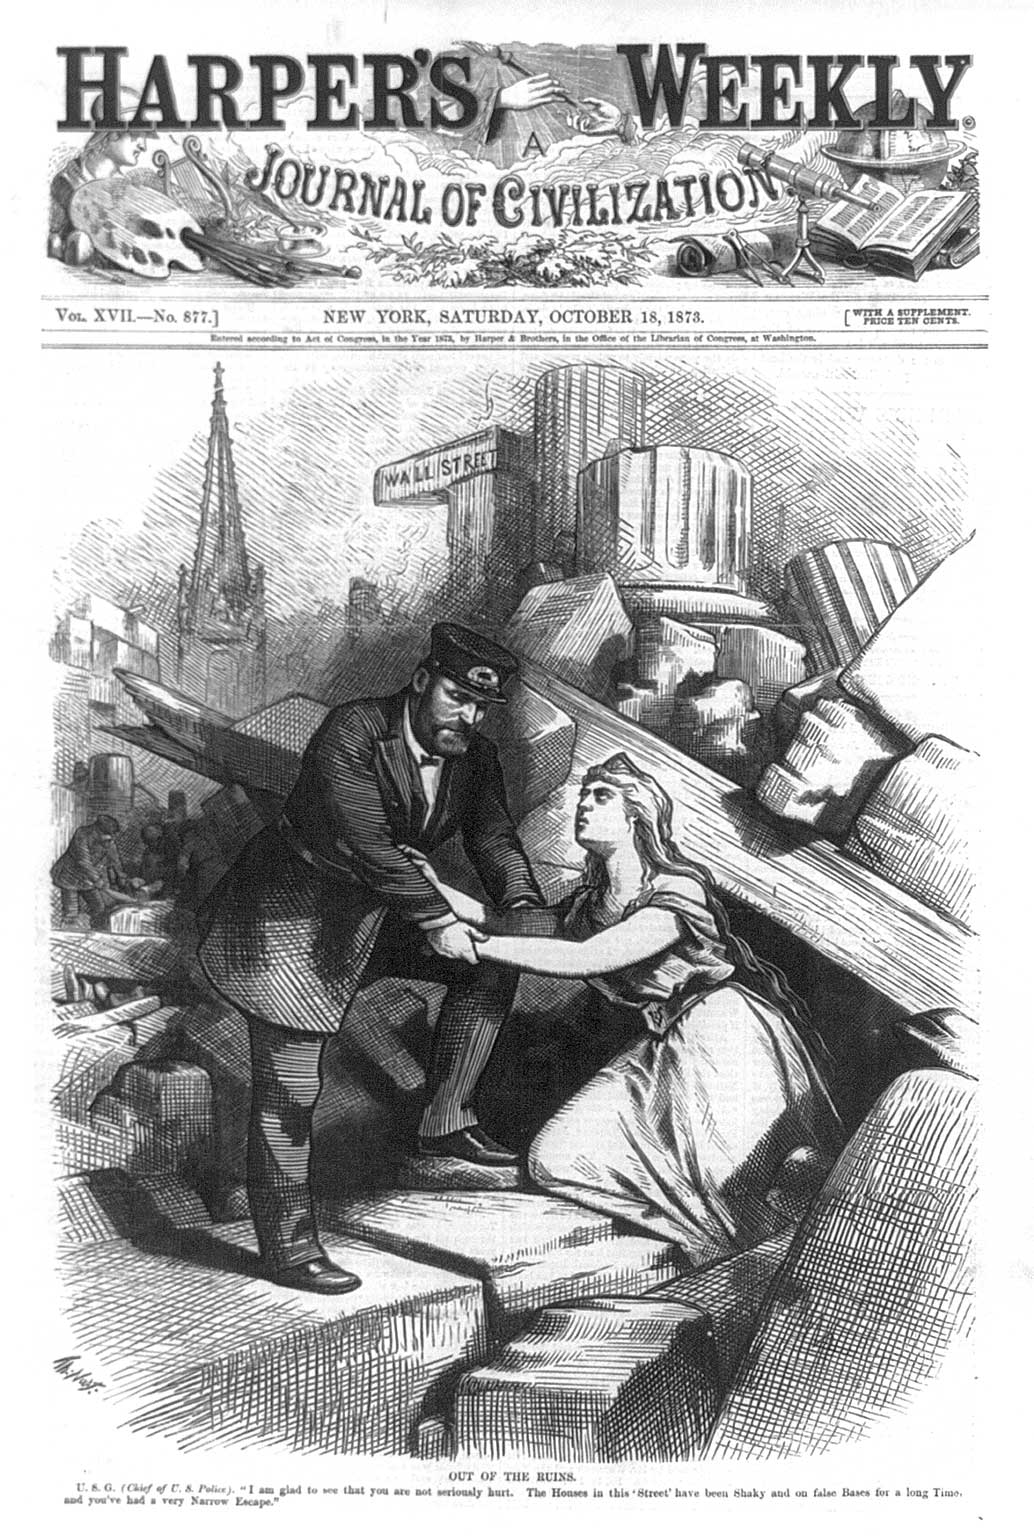 "Out of the Ruins." HARPER"S WEEKLY, October 18, 1873.